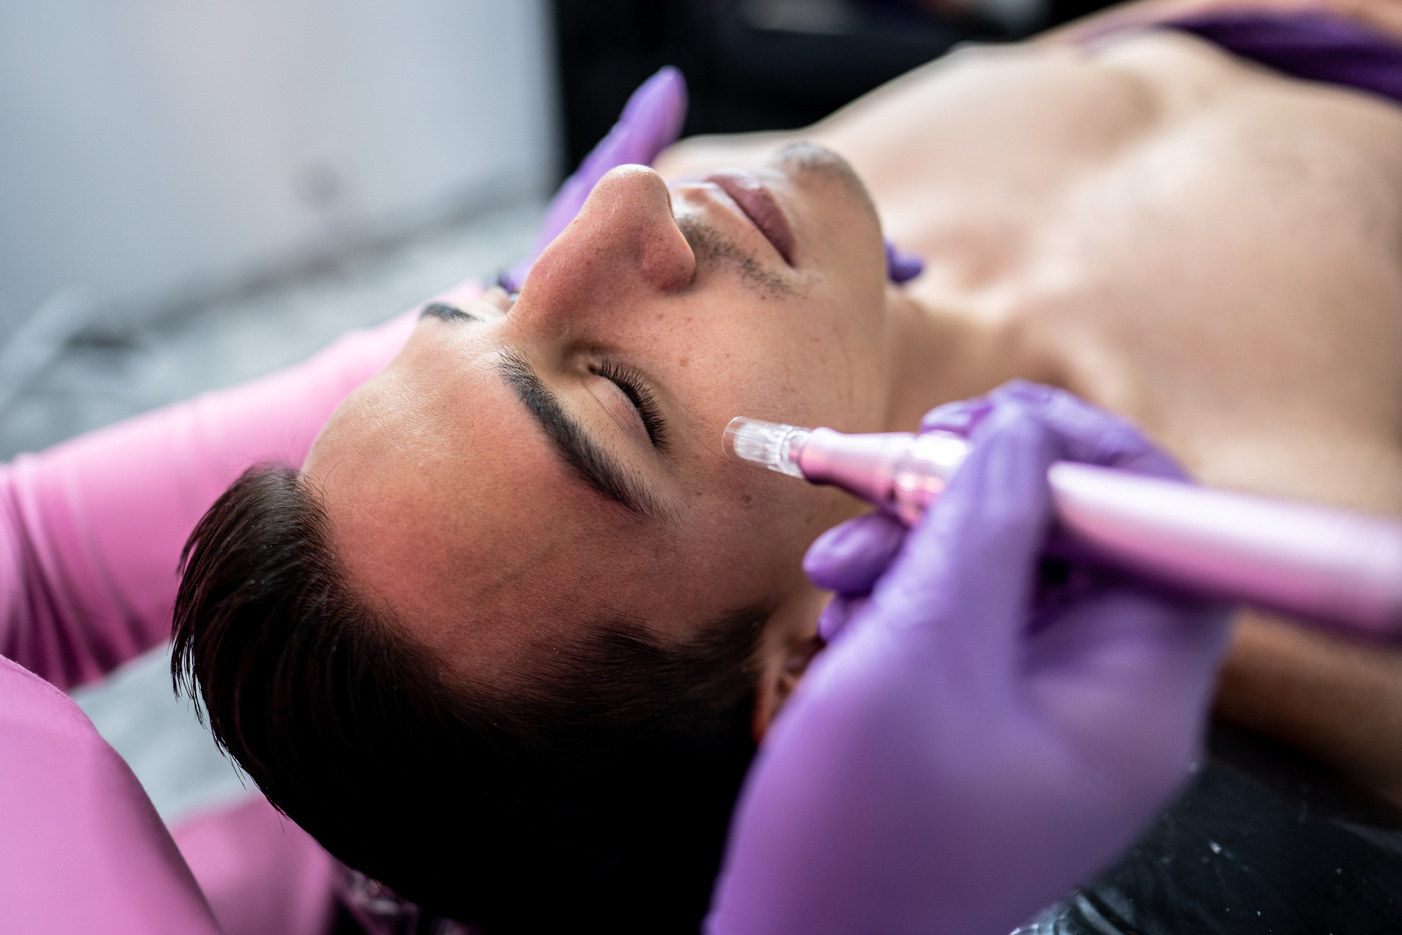 Dermatologist/aesthetician using a microneedling equipment on a patient at clinic